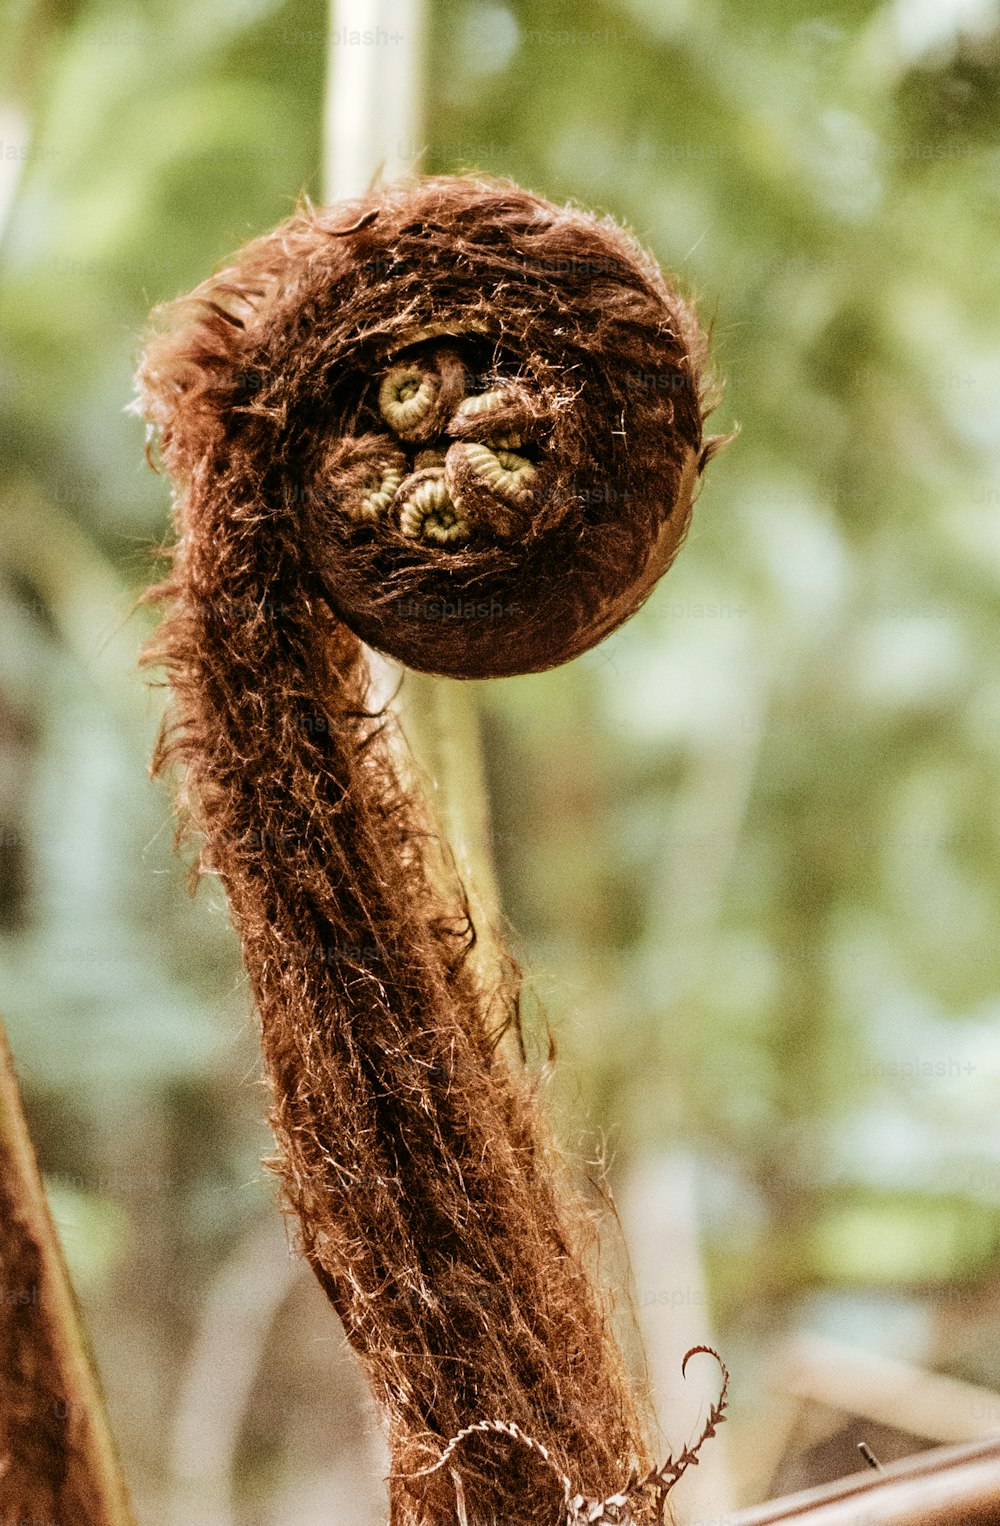 a close up of a plant with a creepy face